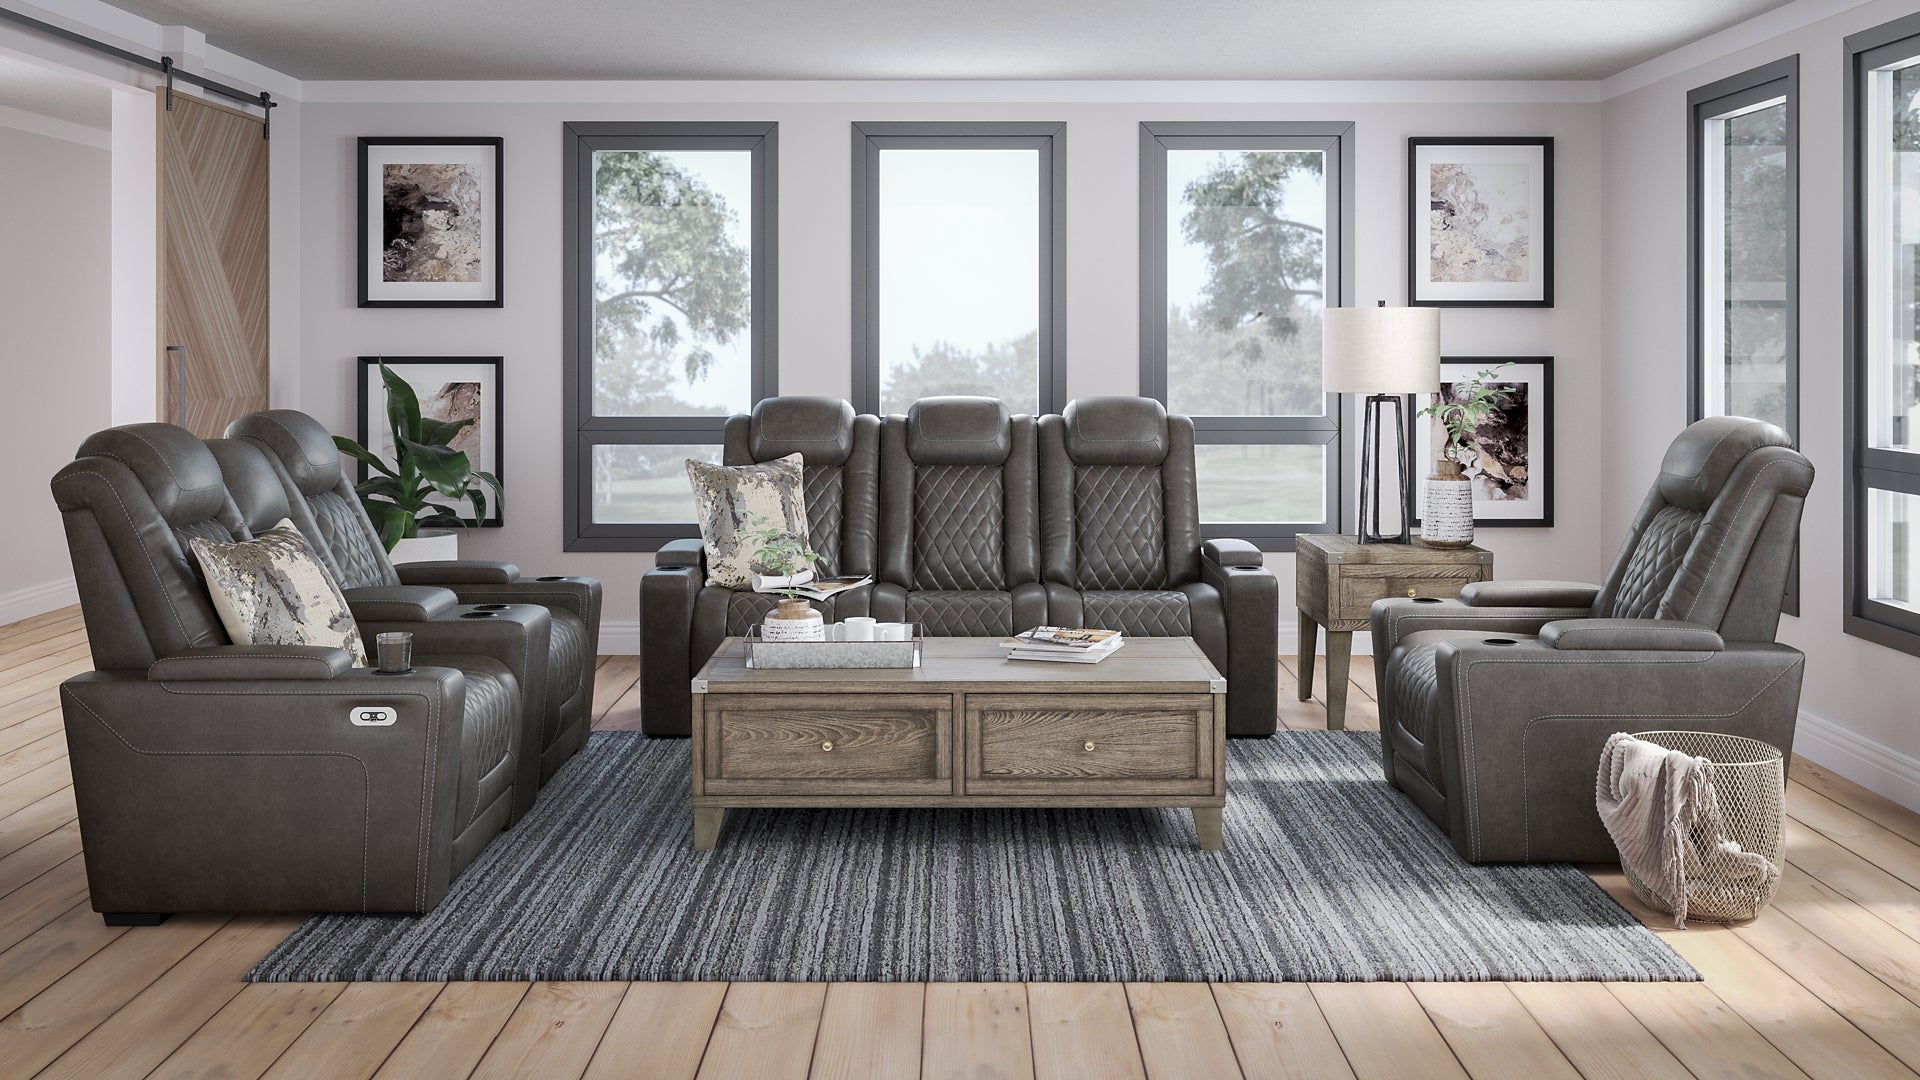 HyllMont Sofa, Loveseat and Recliner JB's Furniture  Home Furniture, Home Decor, Furniture Store